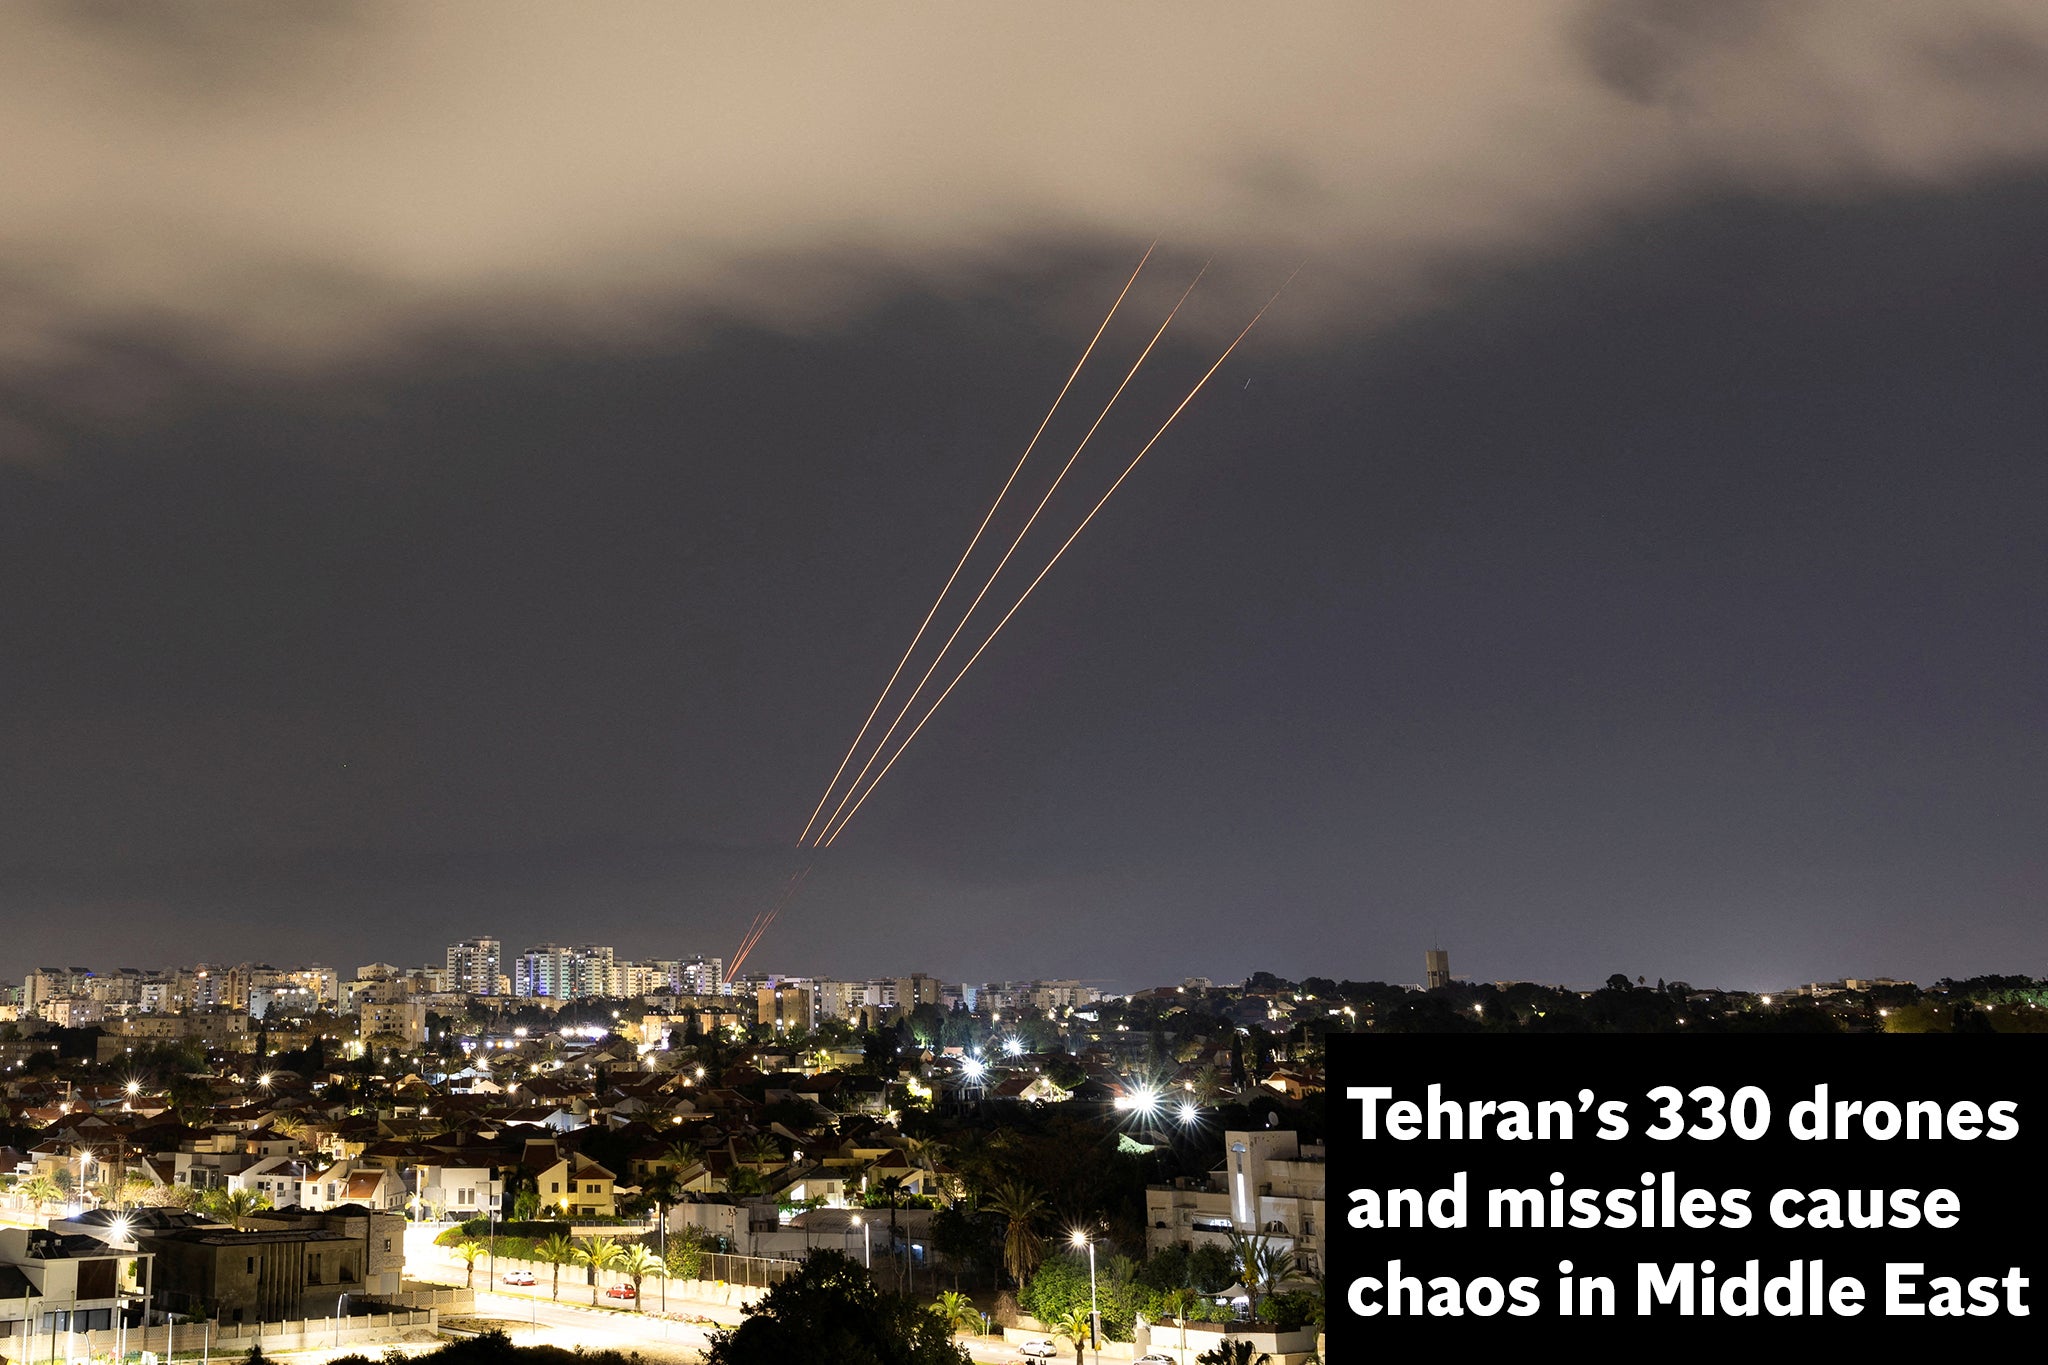 The attack comes in retaliation to an Iranian drone and misile strike on Israel, pictured